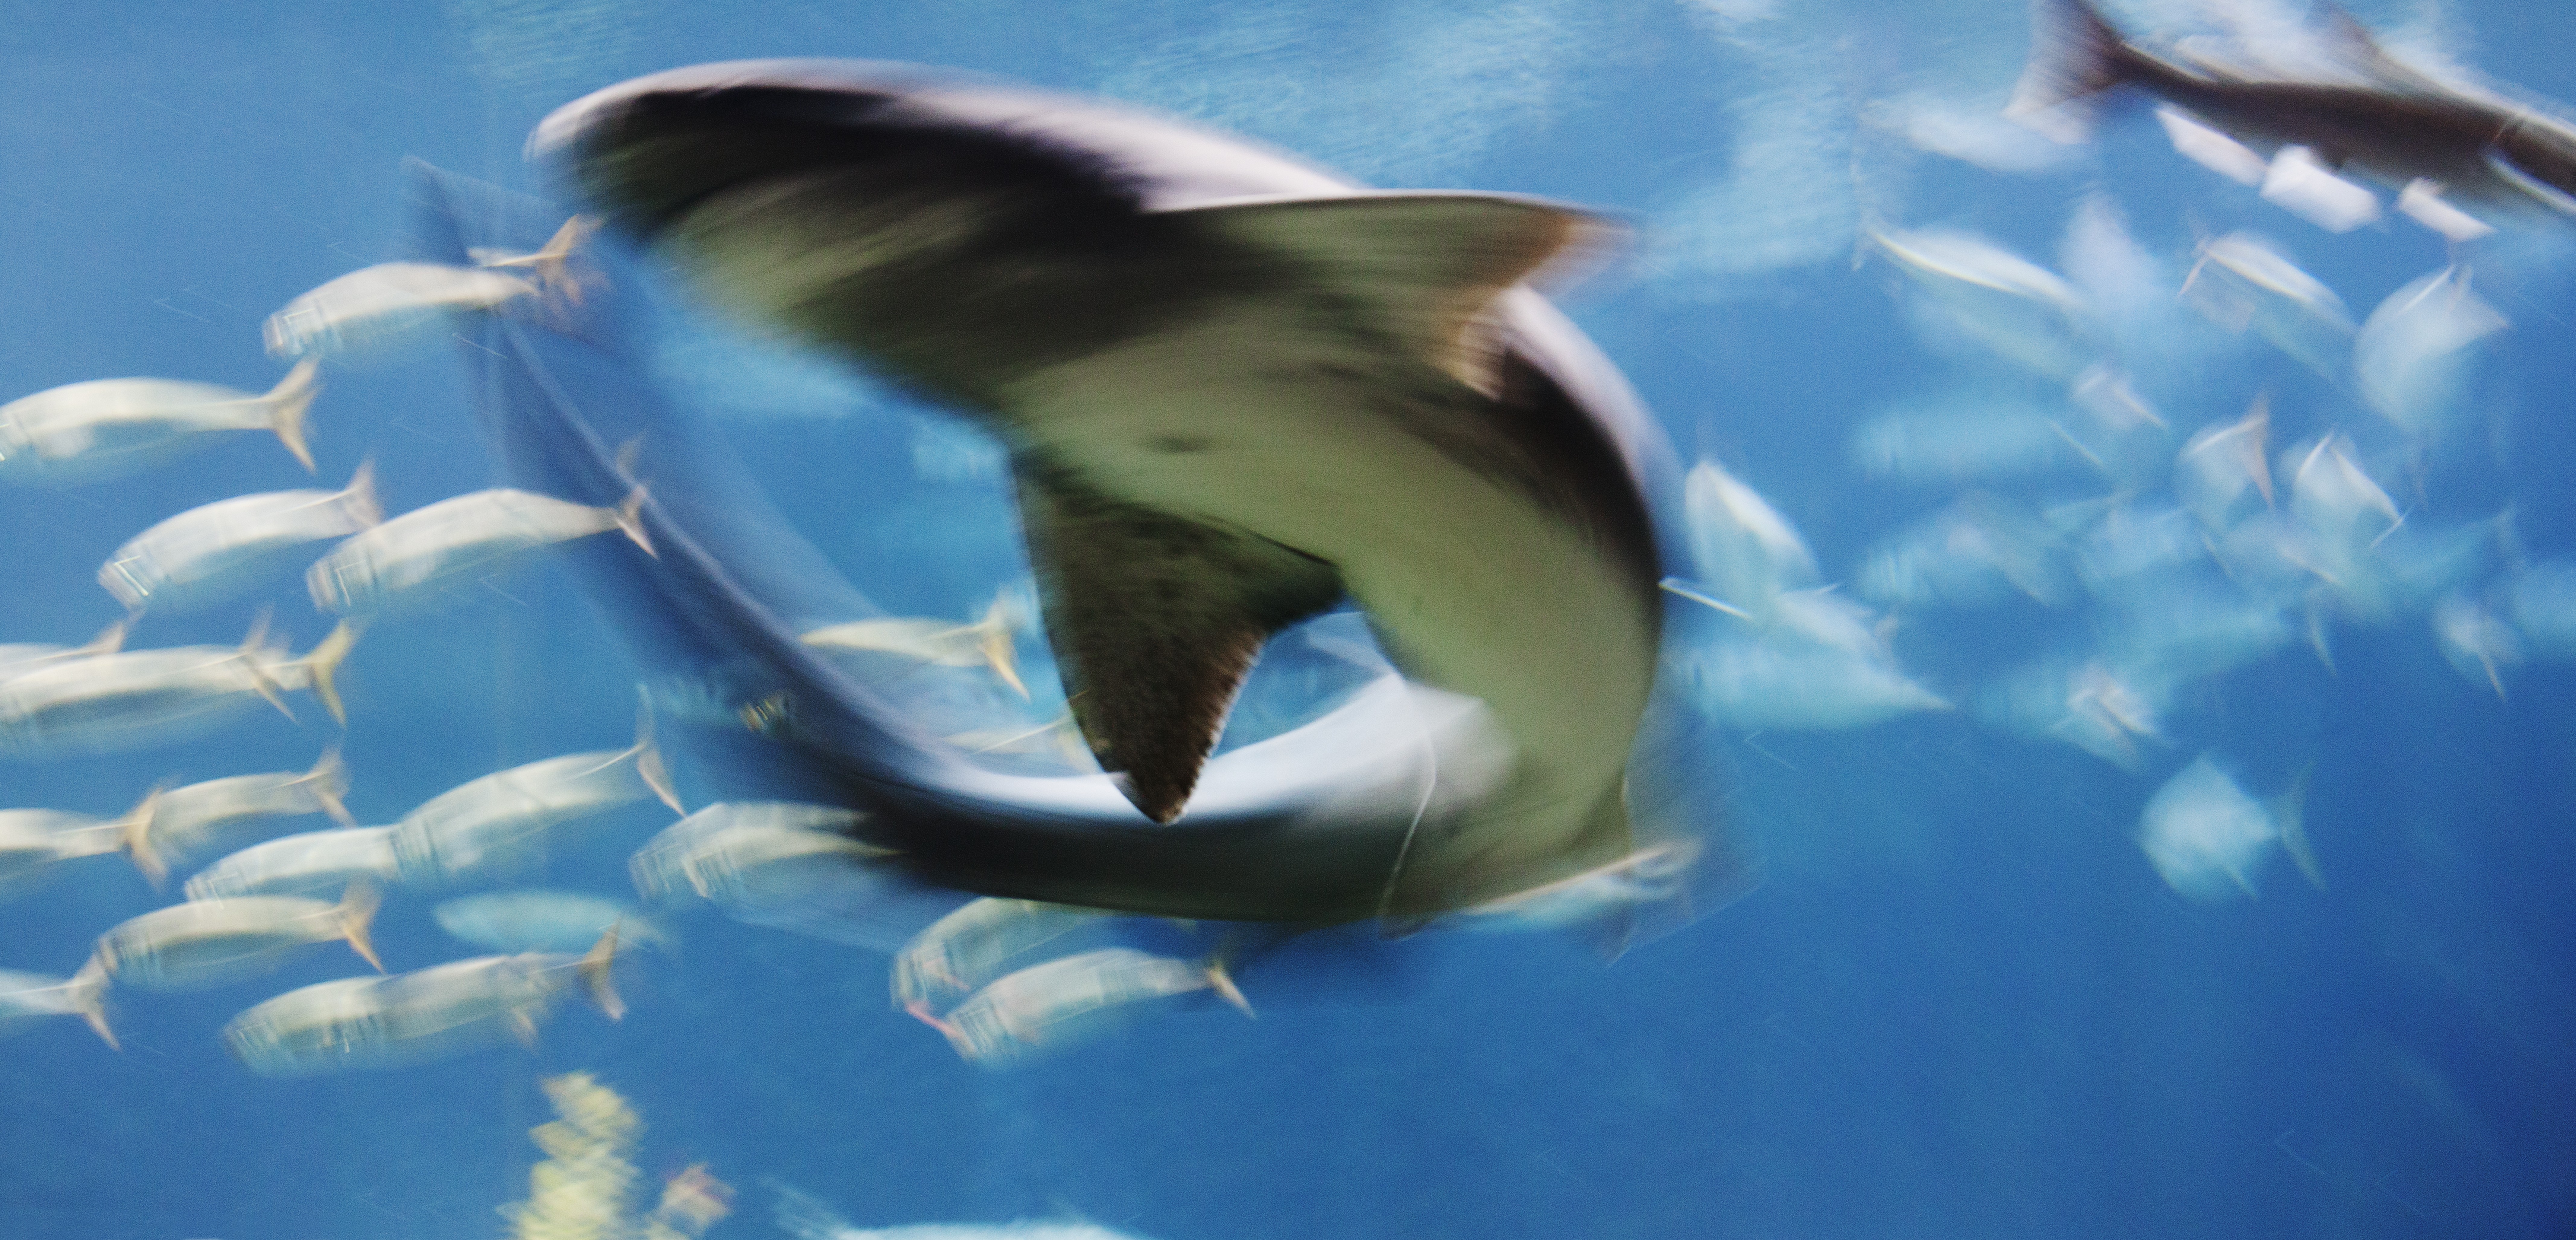 In California the incidence of shark bites is increasing, even while the rate drops. Statistics is fun. Photo by Johnér Images/Corbis